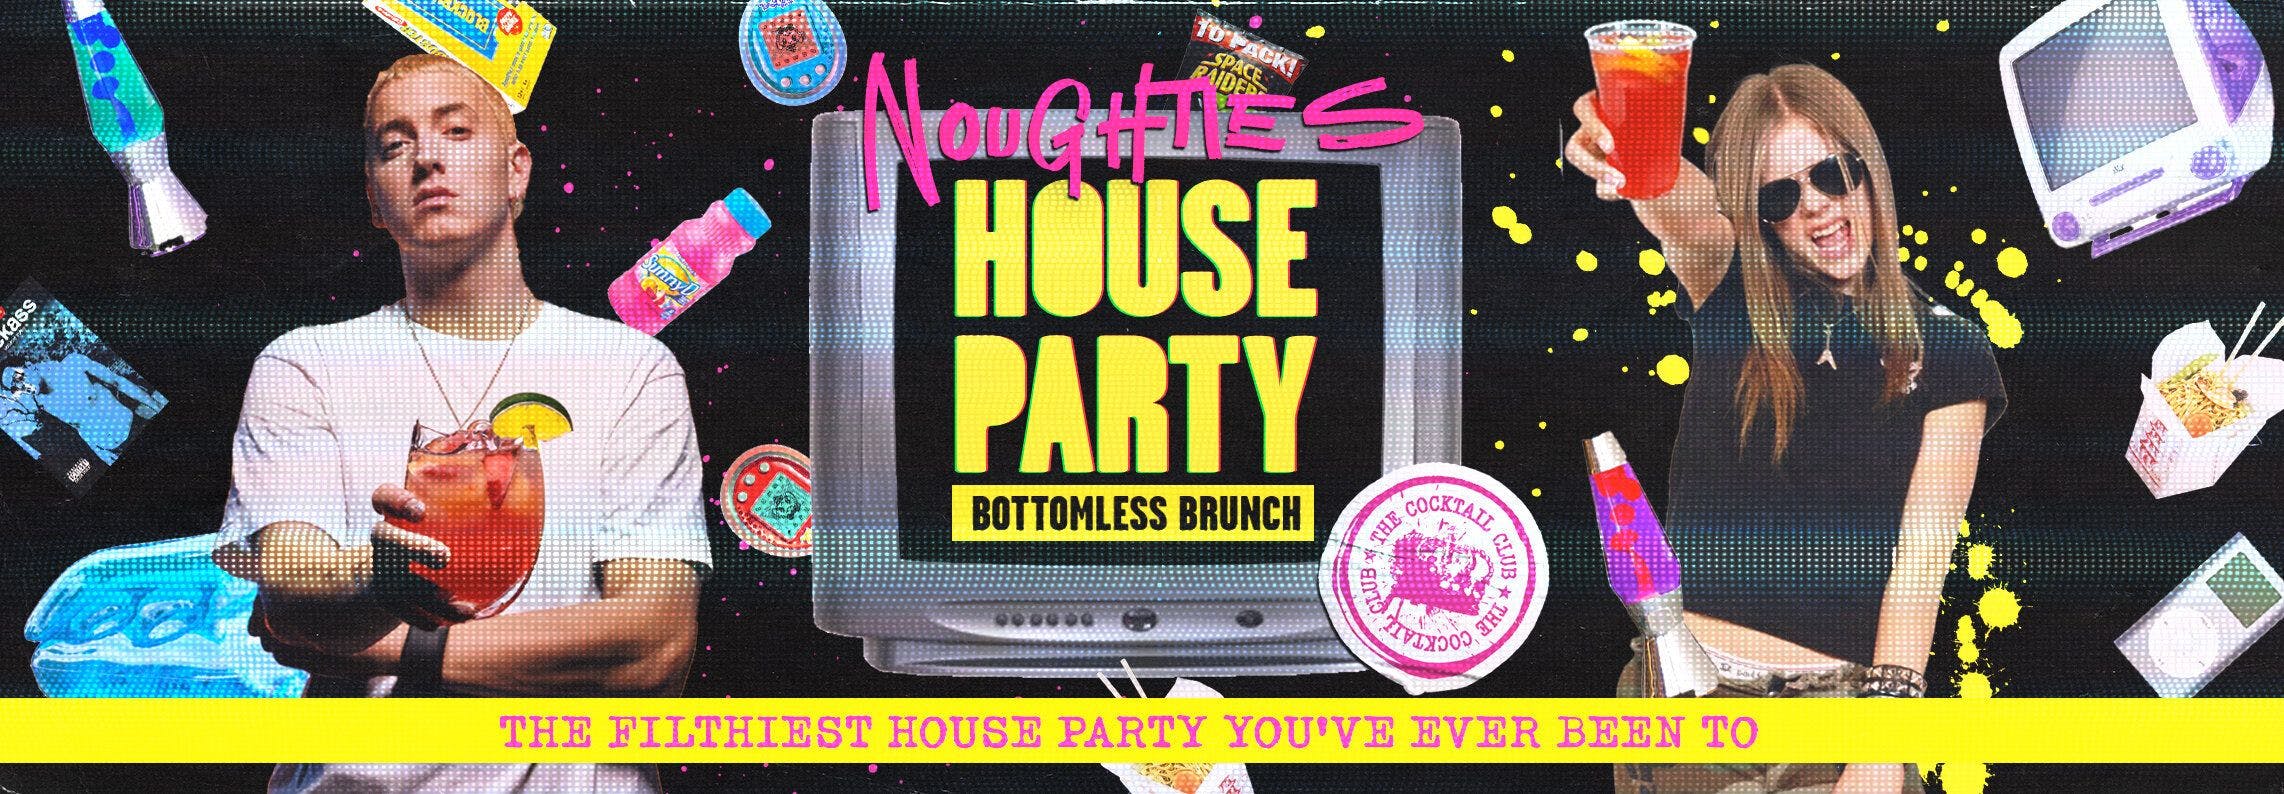 TCC Noughties House Party Bottomless Brunch